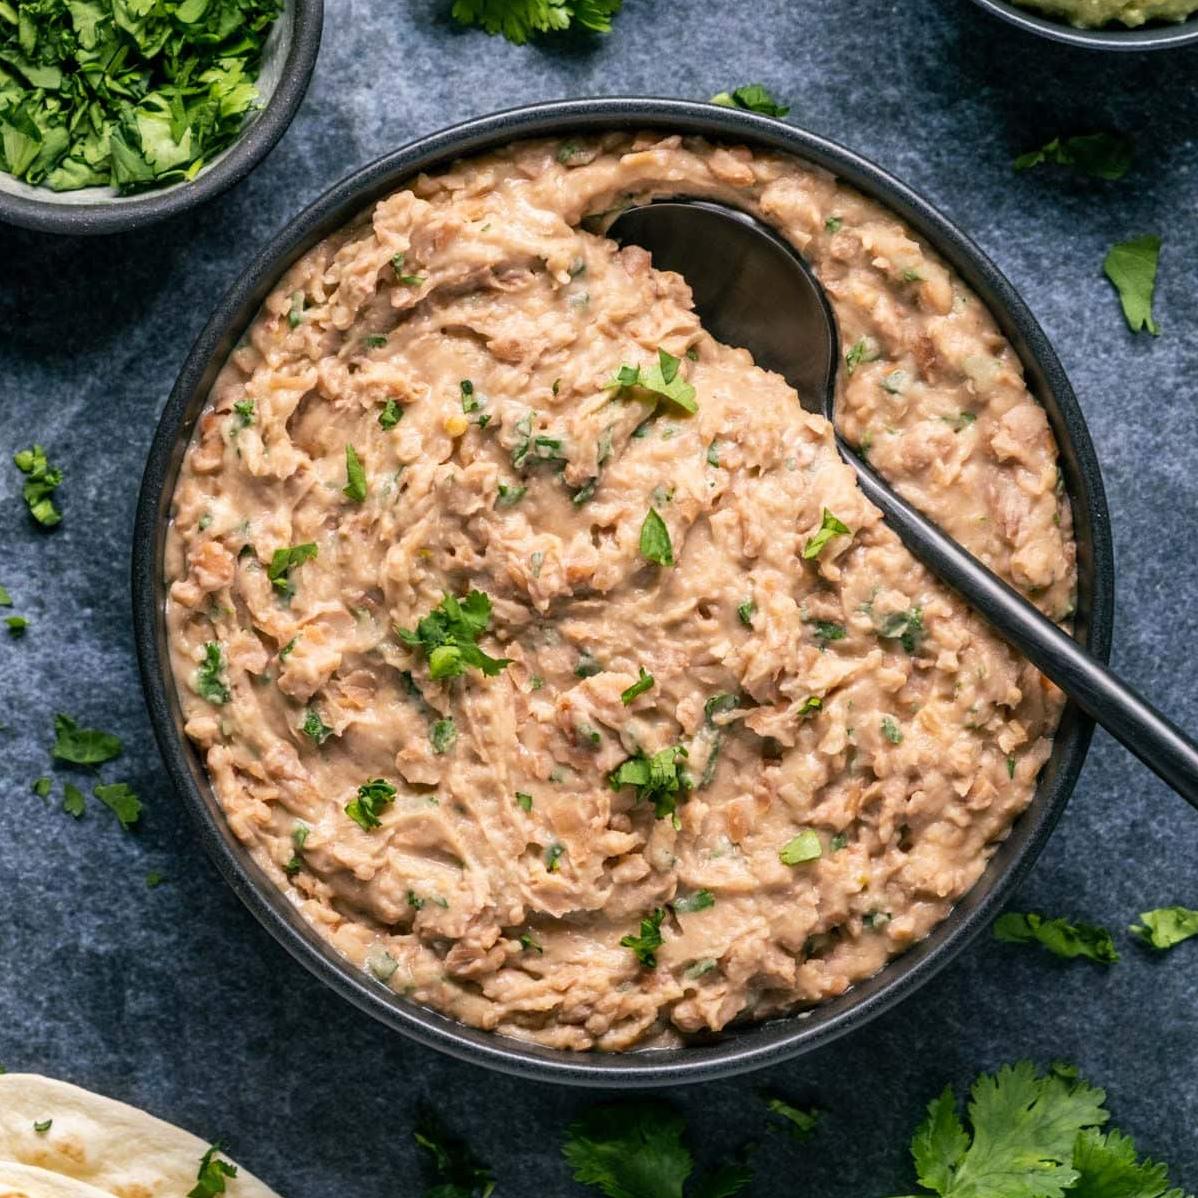  Enjoy a plant-based twist on a traditional Mexican staple with these vegan refried beans.